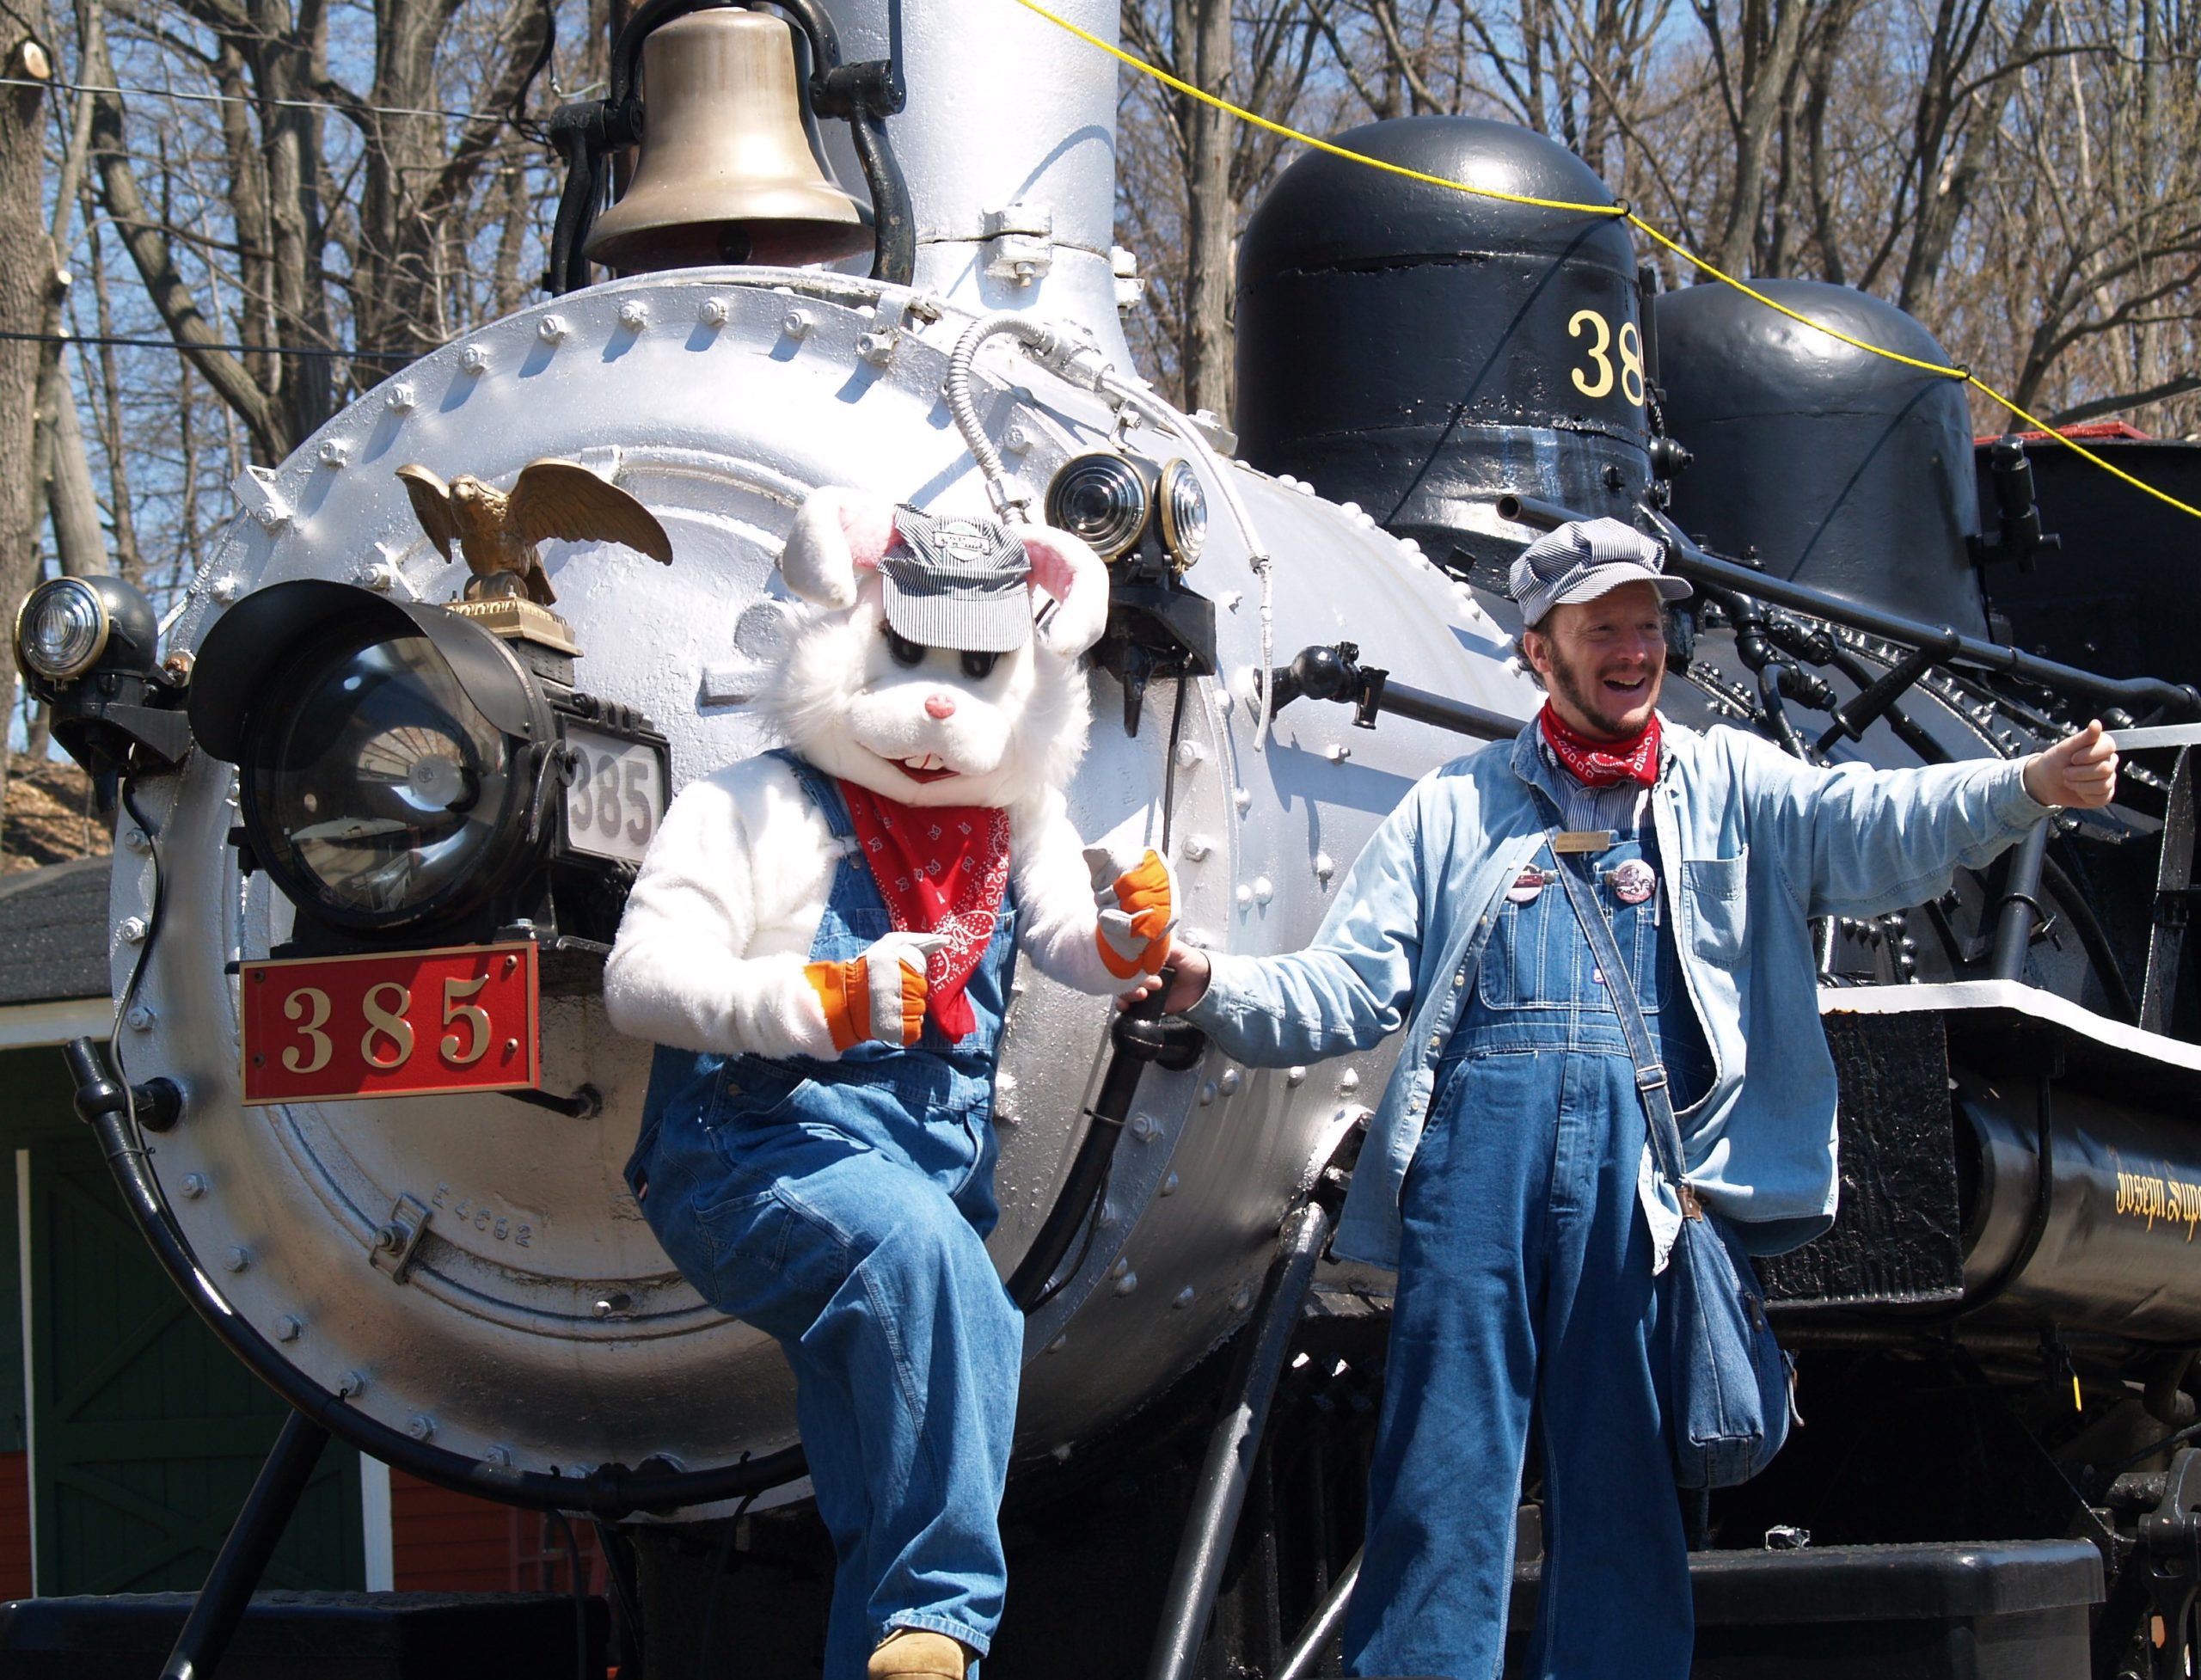 Whippany Railway Museum's Excursion Train will operate on Sunday